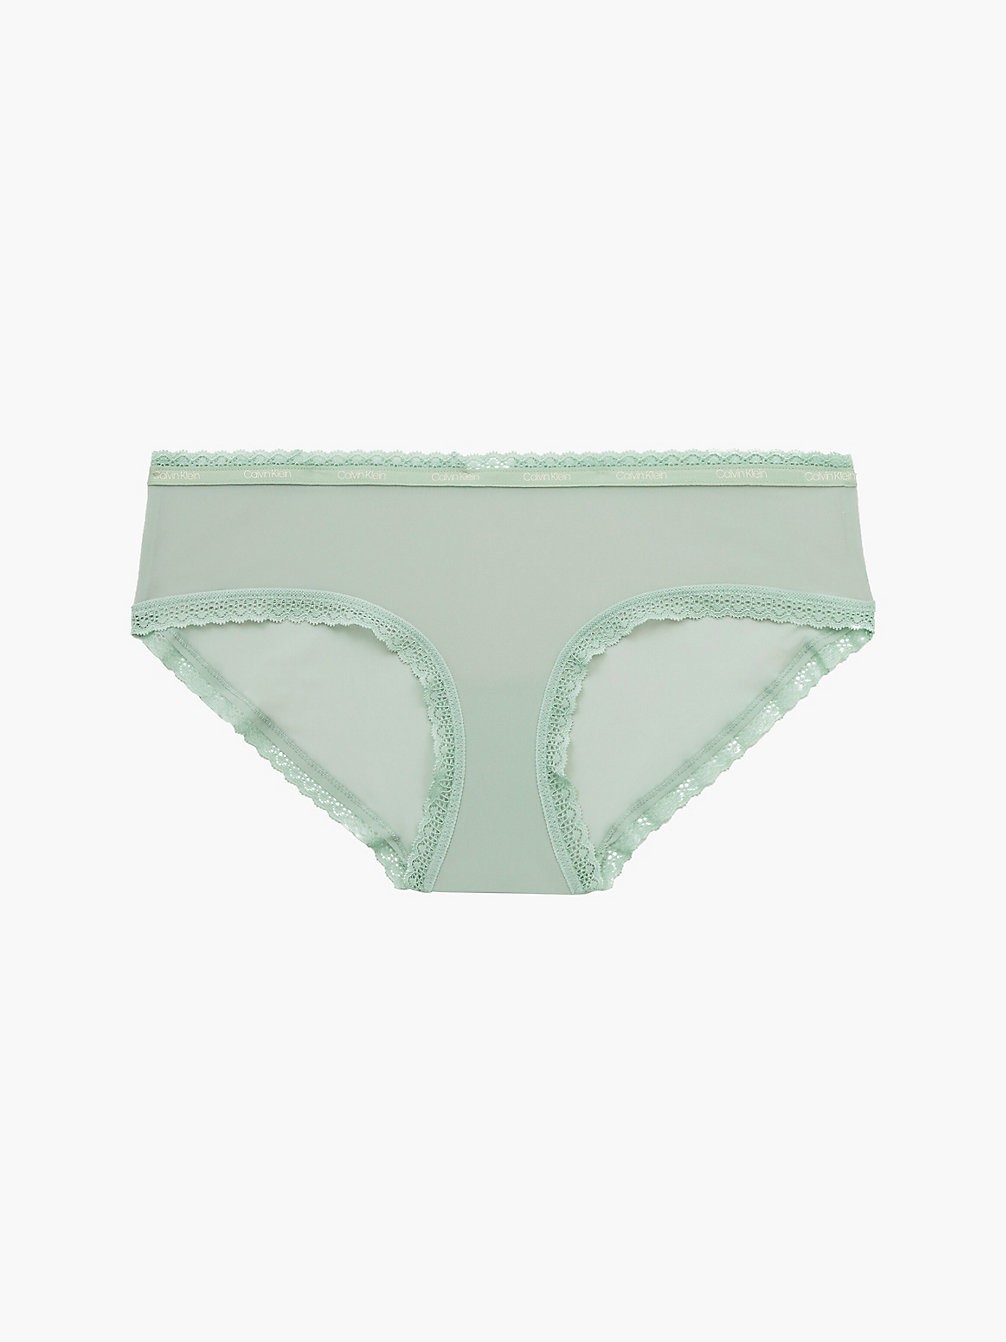 SAGE MEADOW Hipster Panty - Bottoms Up undefined women Calvin Klein